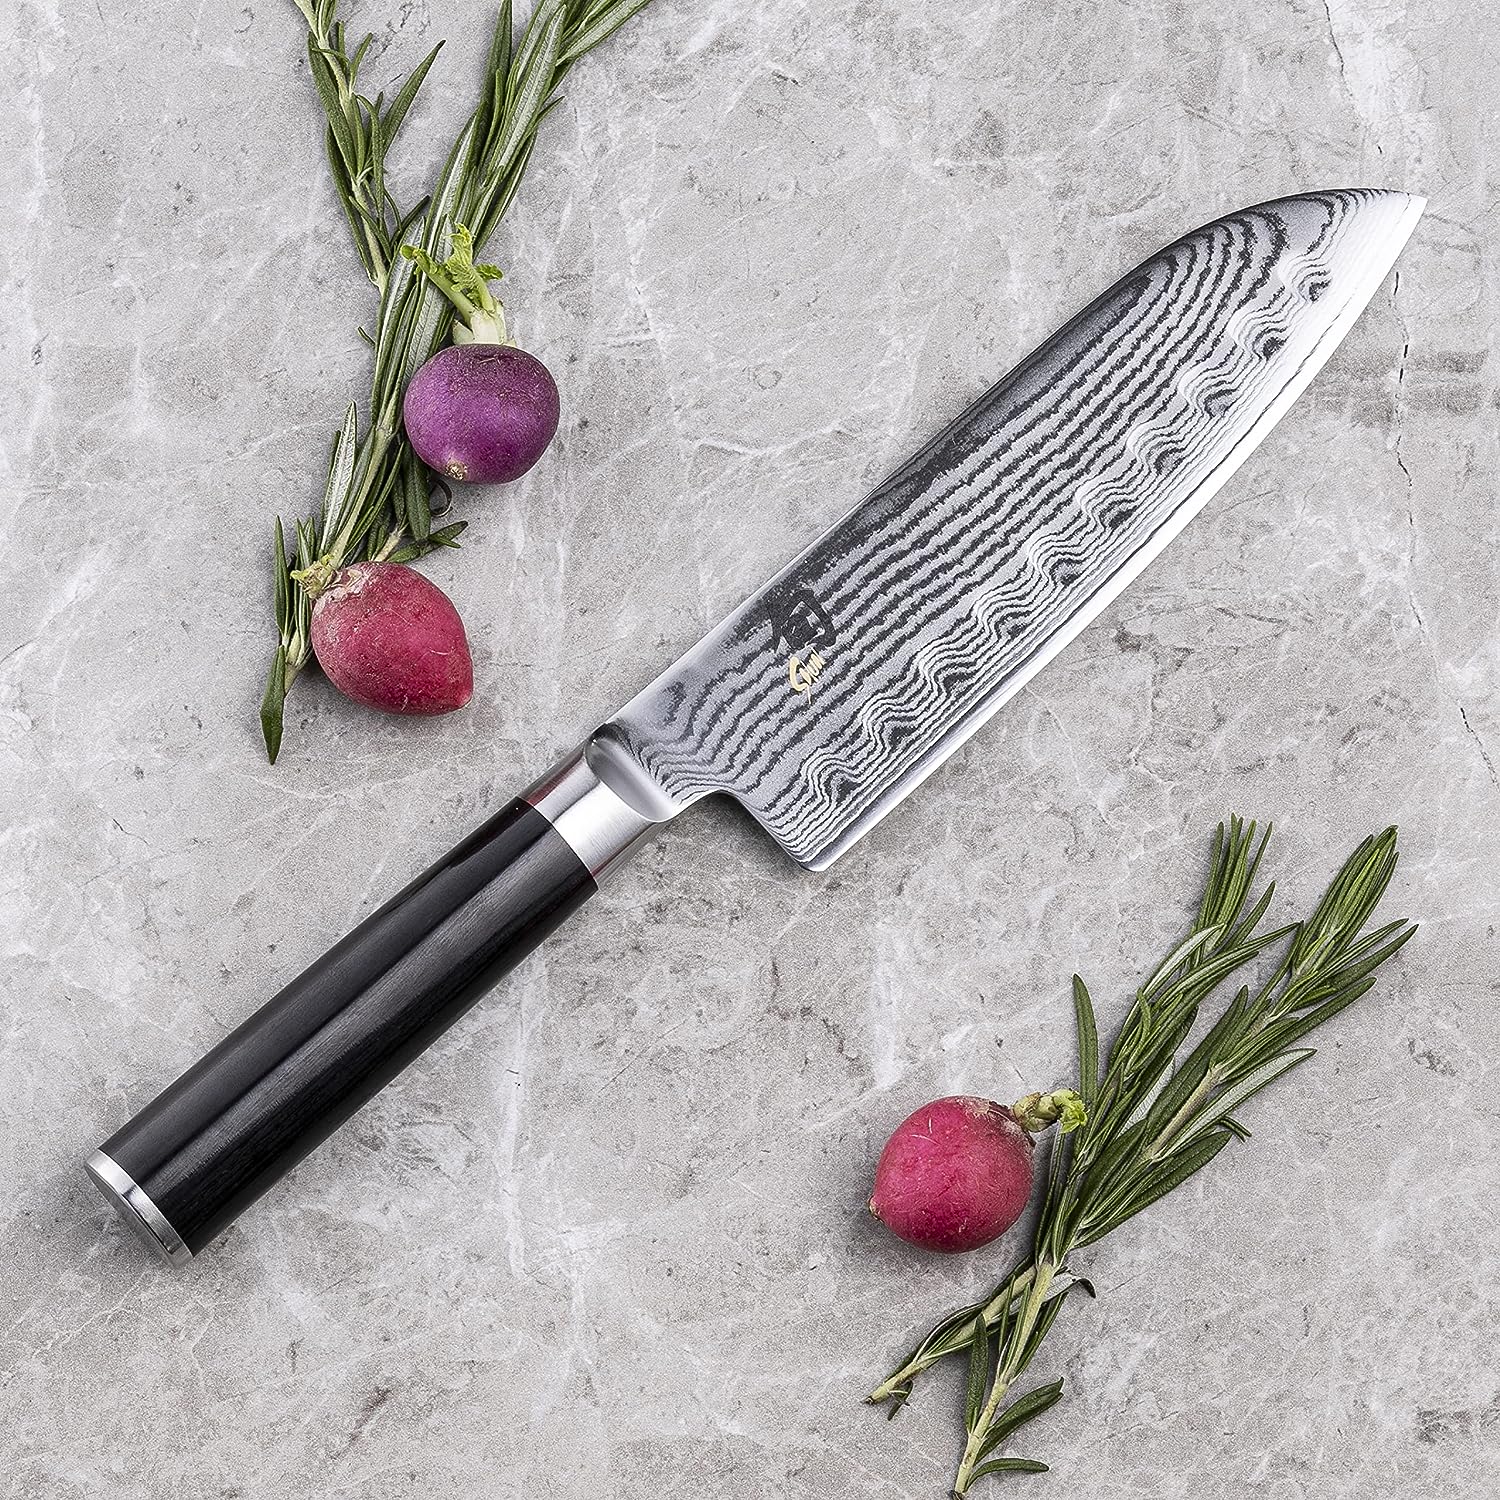 Shun Classic 7” Hollow-Ground Santoku All-Purpose Kitchen Knife; VG-MAX Blade Steel and Ebony PakkaWood Handle; Hollow-Ground Indentations for Reduced Friction and Smoother Cuts; Handcrafted in Japan